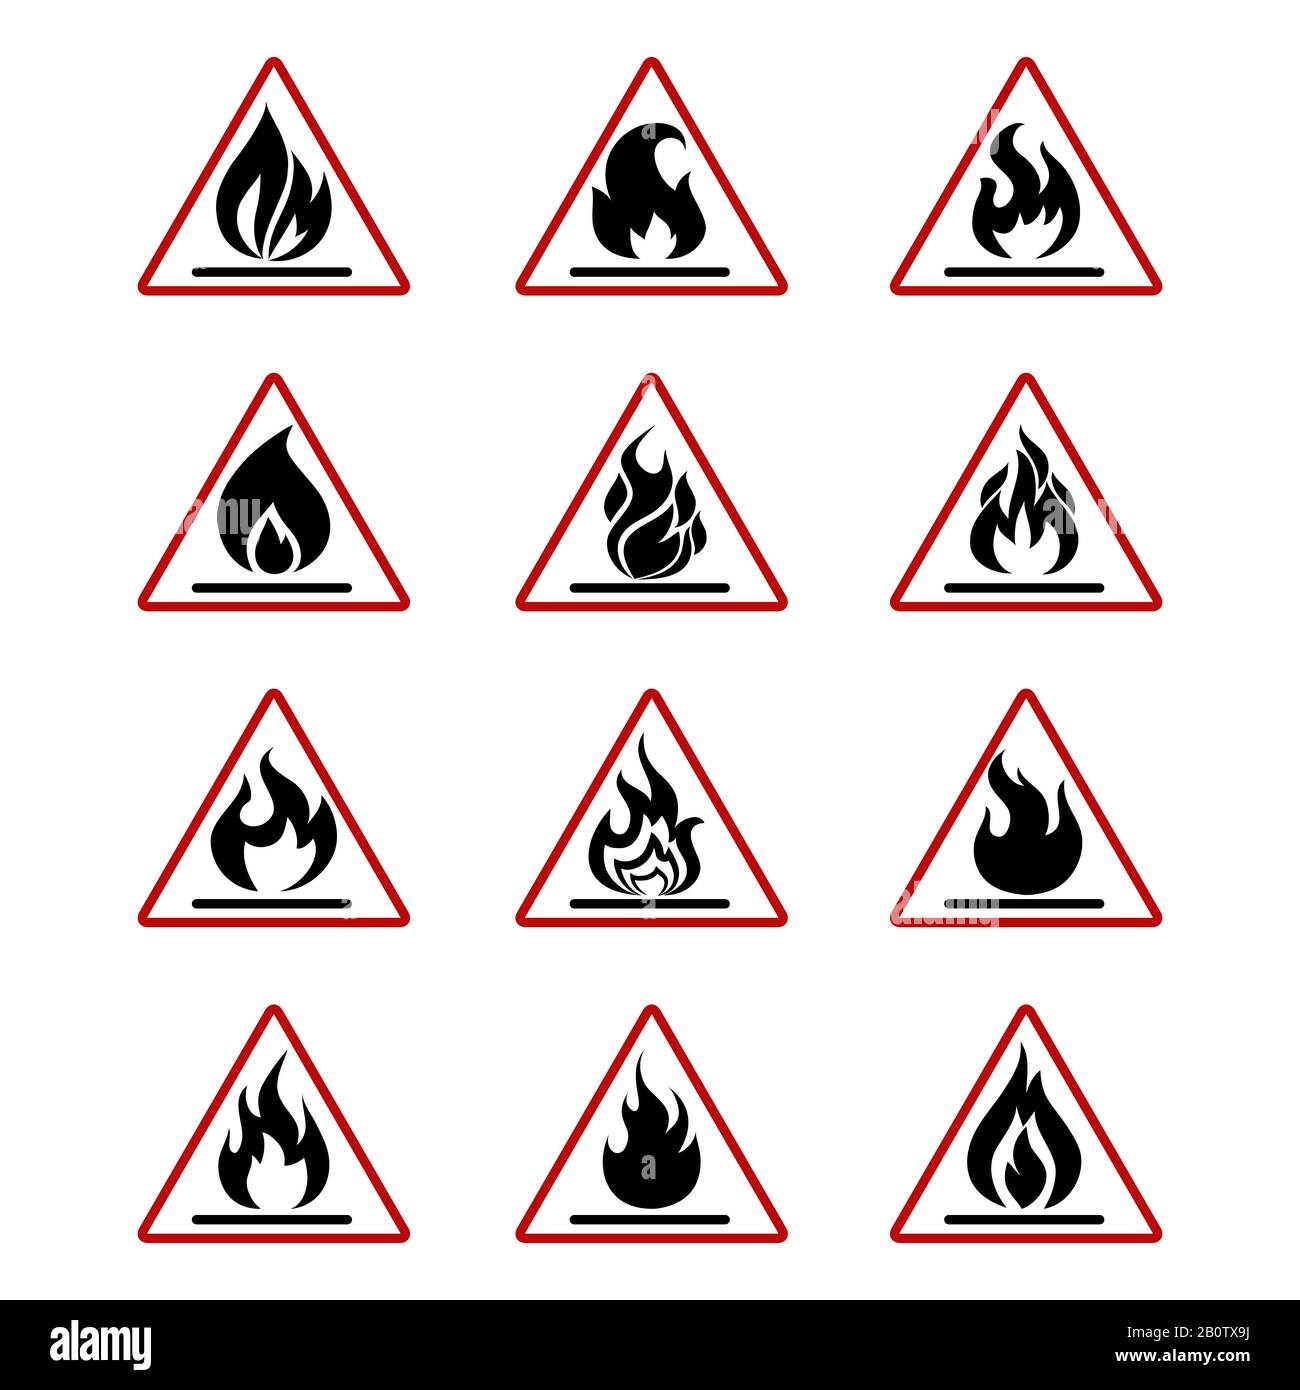 Danger fire icons with flame isolated on white. Danger symbol set illustration Stock Vector